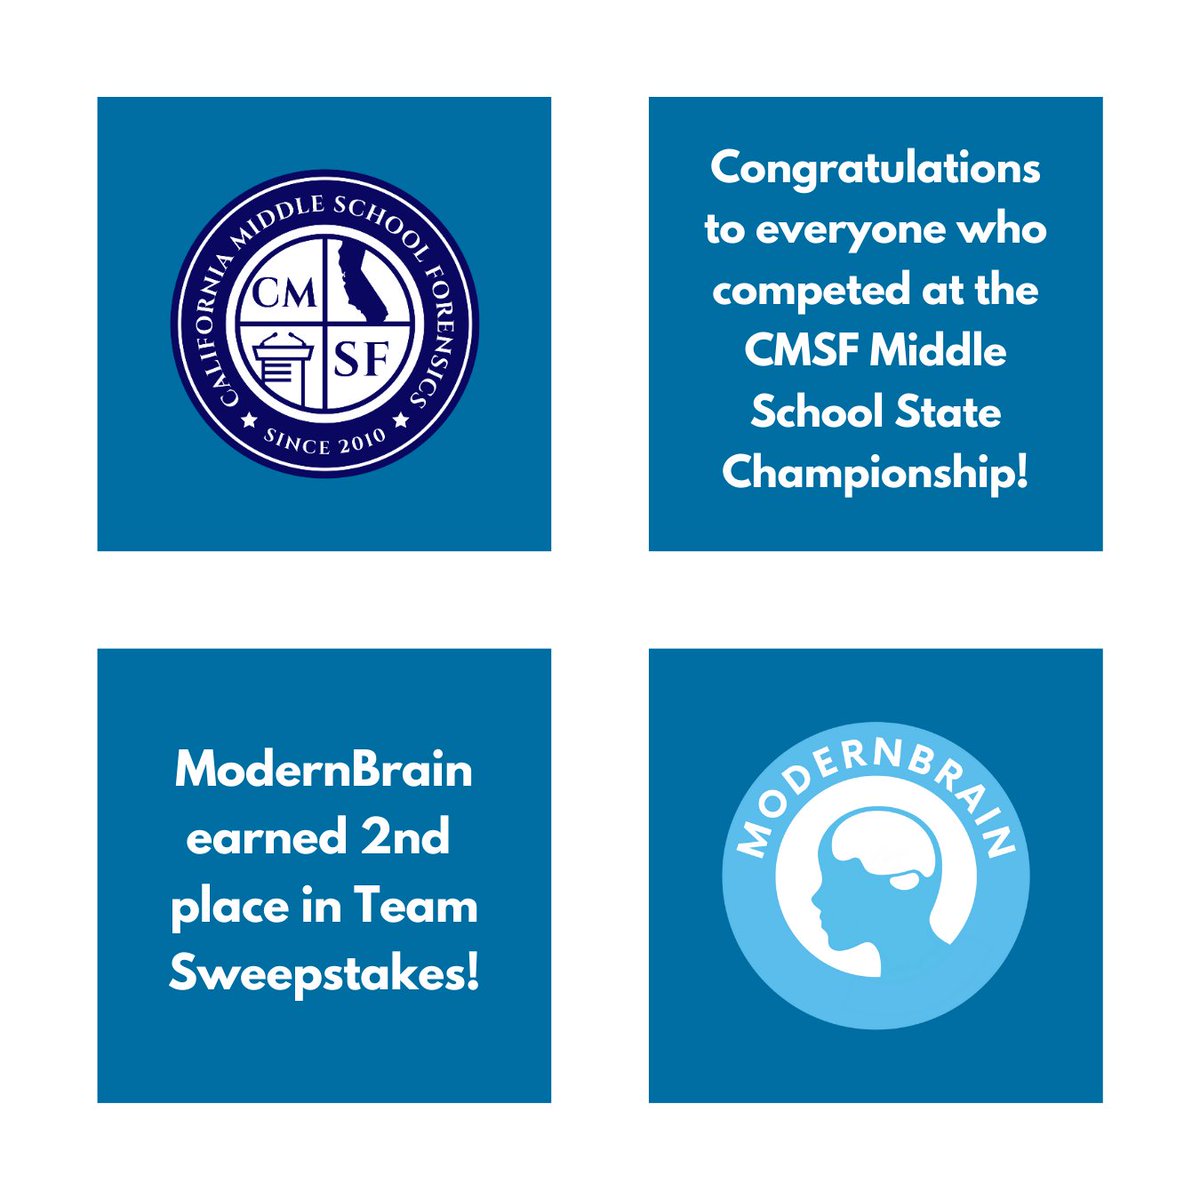 Congratulations to everyone who competed at the CMSF Middle School State Championship! ModernBrain earned 2nd place in Team Sweepstakes! ⭐
.
.
.
#speech #debate #speechanddebate #publicspeaking #leadership #publicspeakingskills #english #education #modelun #mun #mocktrial